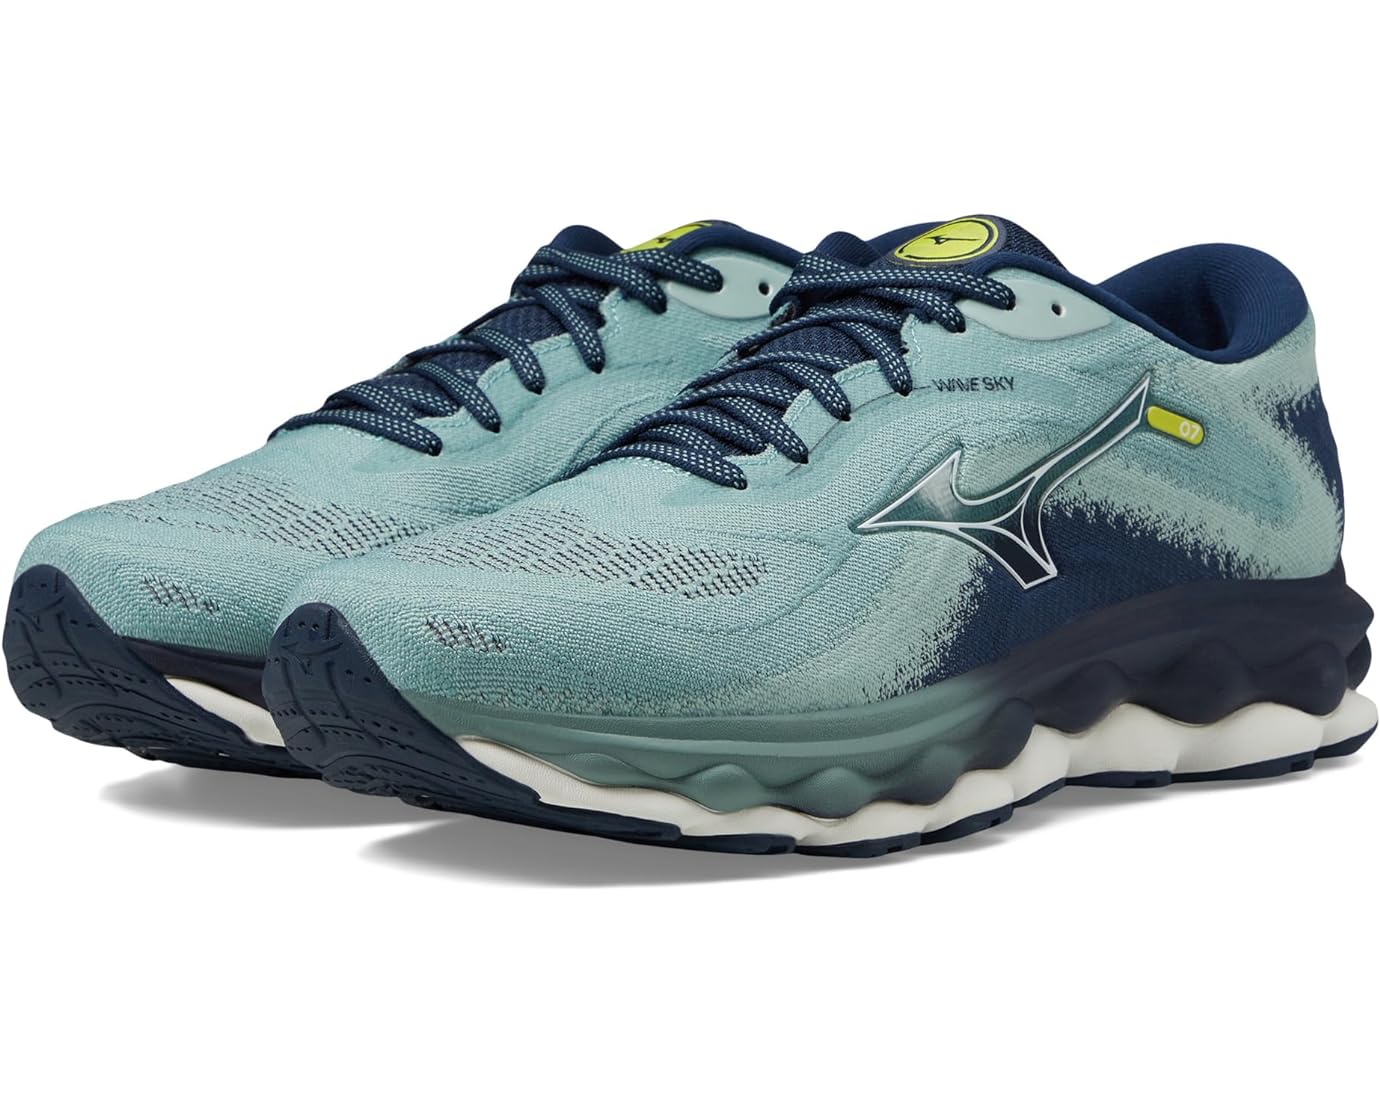 Mizuno Men's & Women's Running Shoes (Limited Size & Stock): Wave Sky 7 $76.45, Men's Wave Rider 27 $ $76.45 & More + Free Shipping